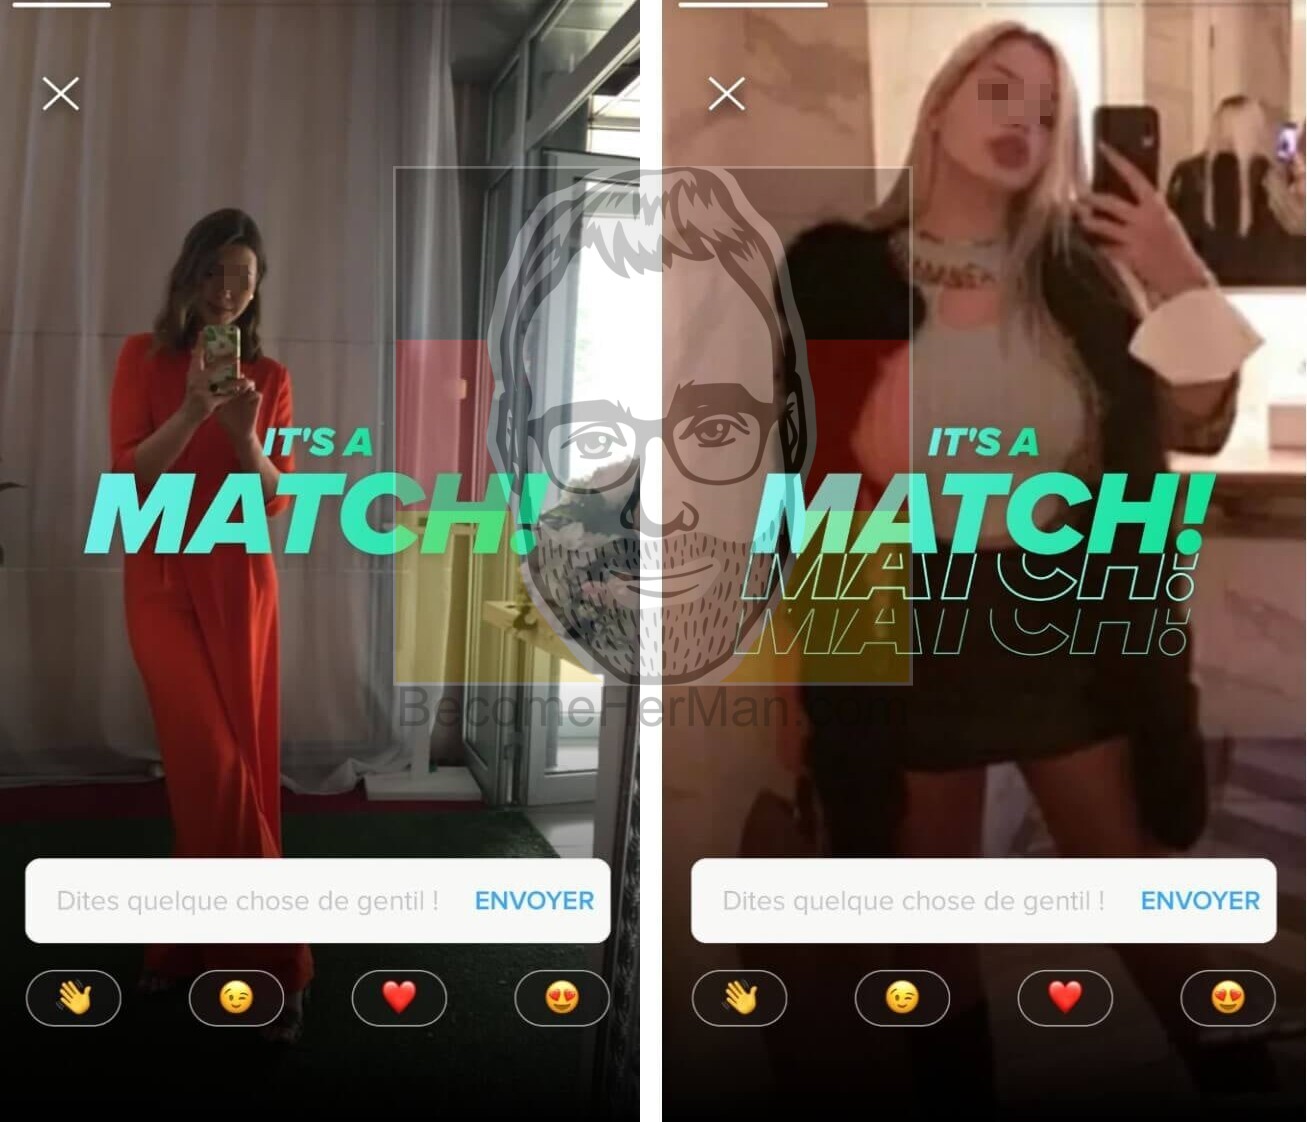 Women you can match with after learning how to get more matches on Tinder